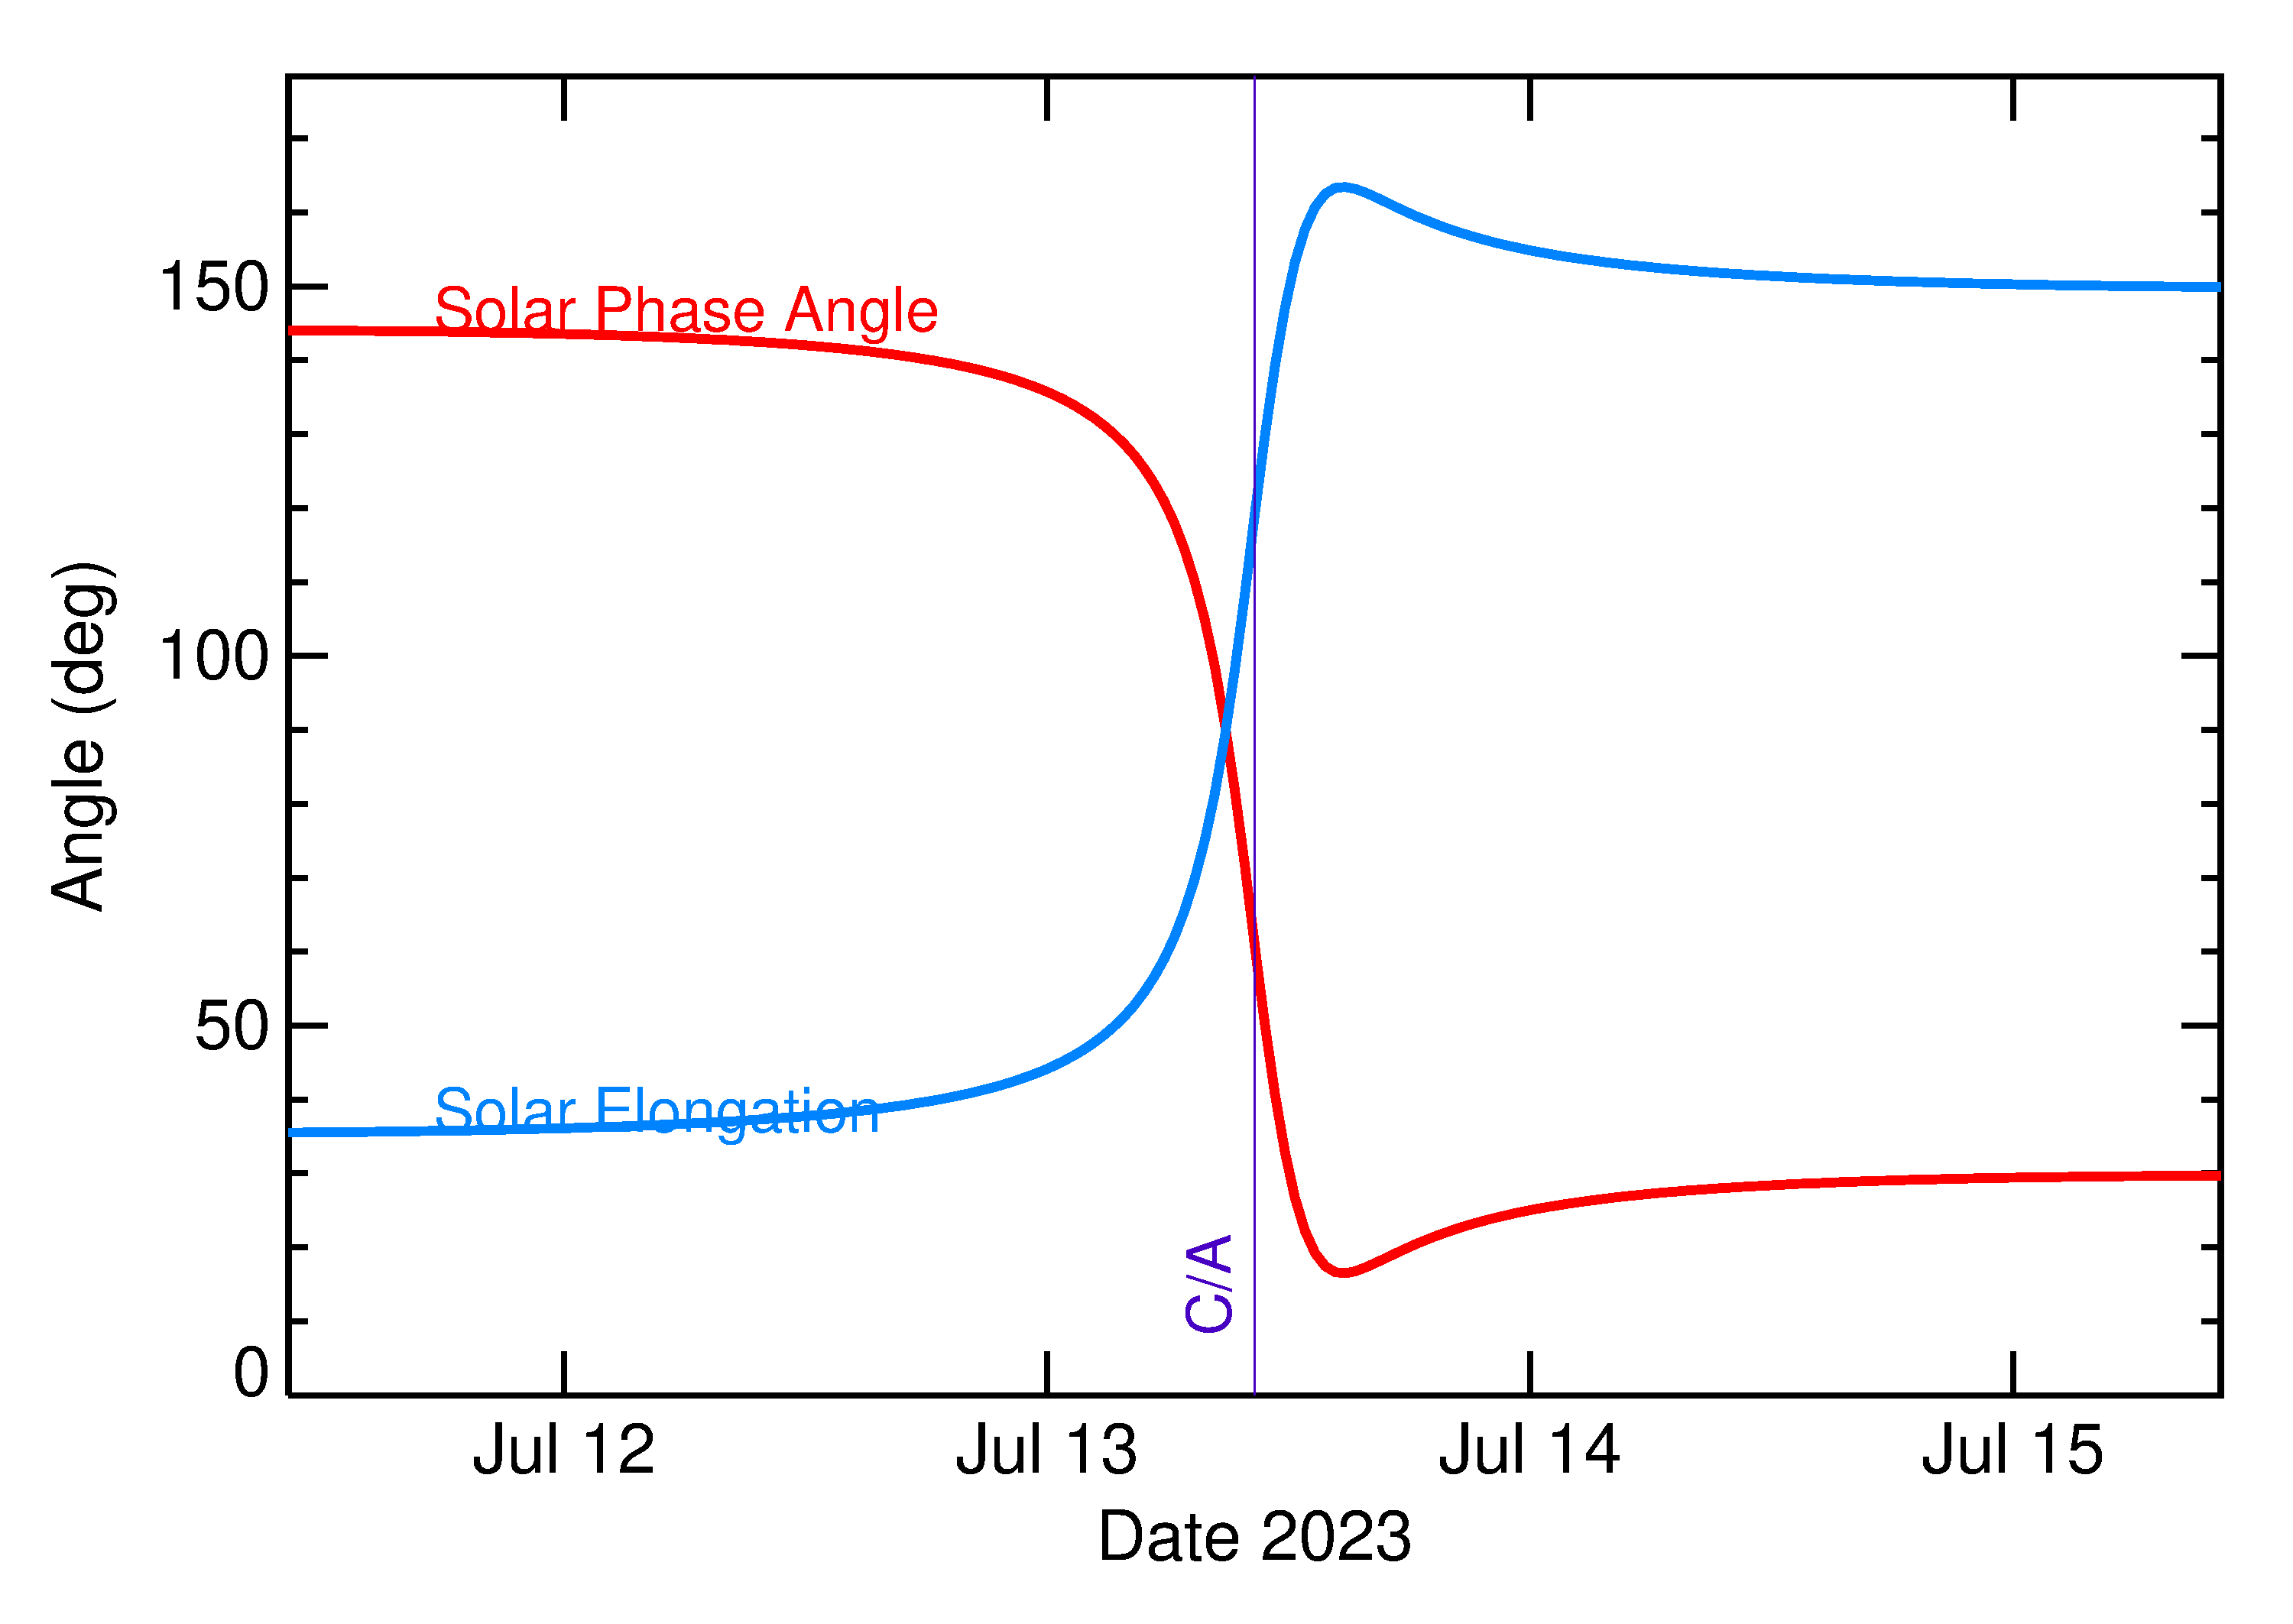 Solar Elongation and Solar Phase Angle of 2023 NT1 in the days around closest approach